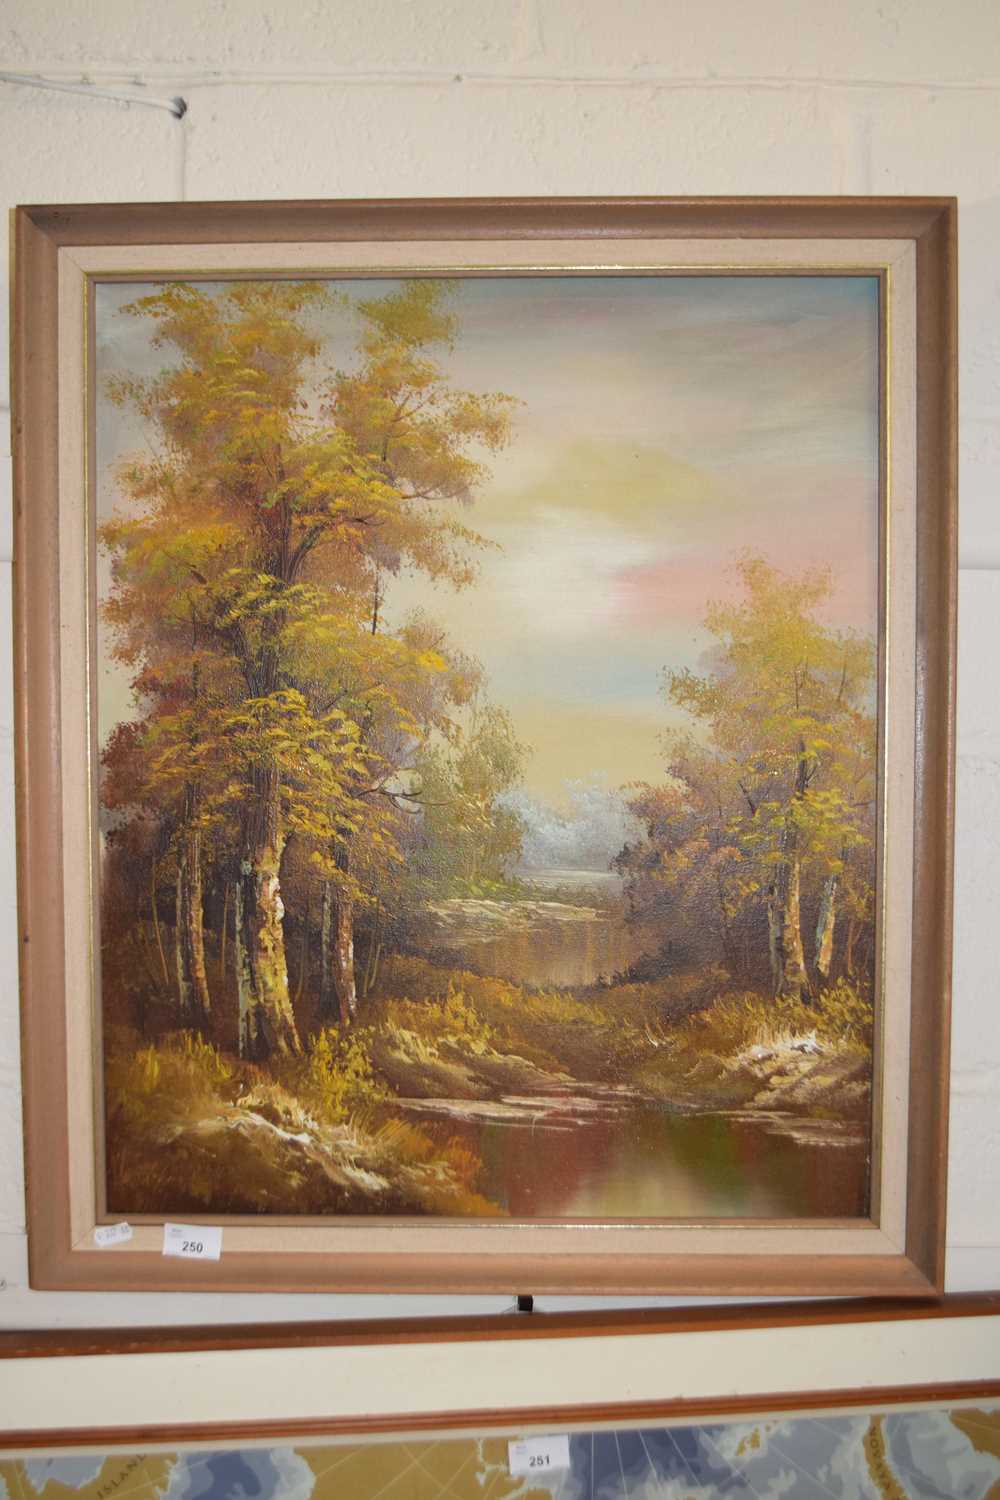 Contemporary school study of a woodland scene, oil on canvas